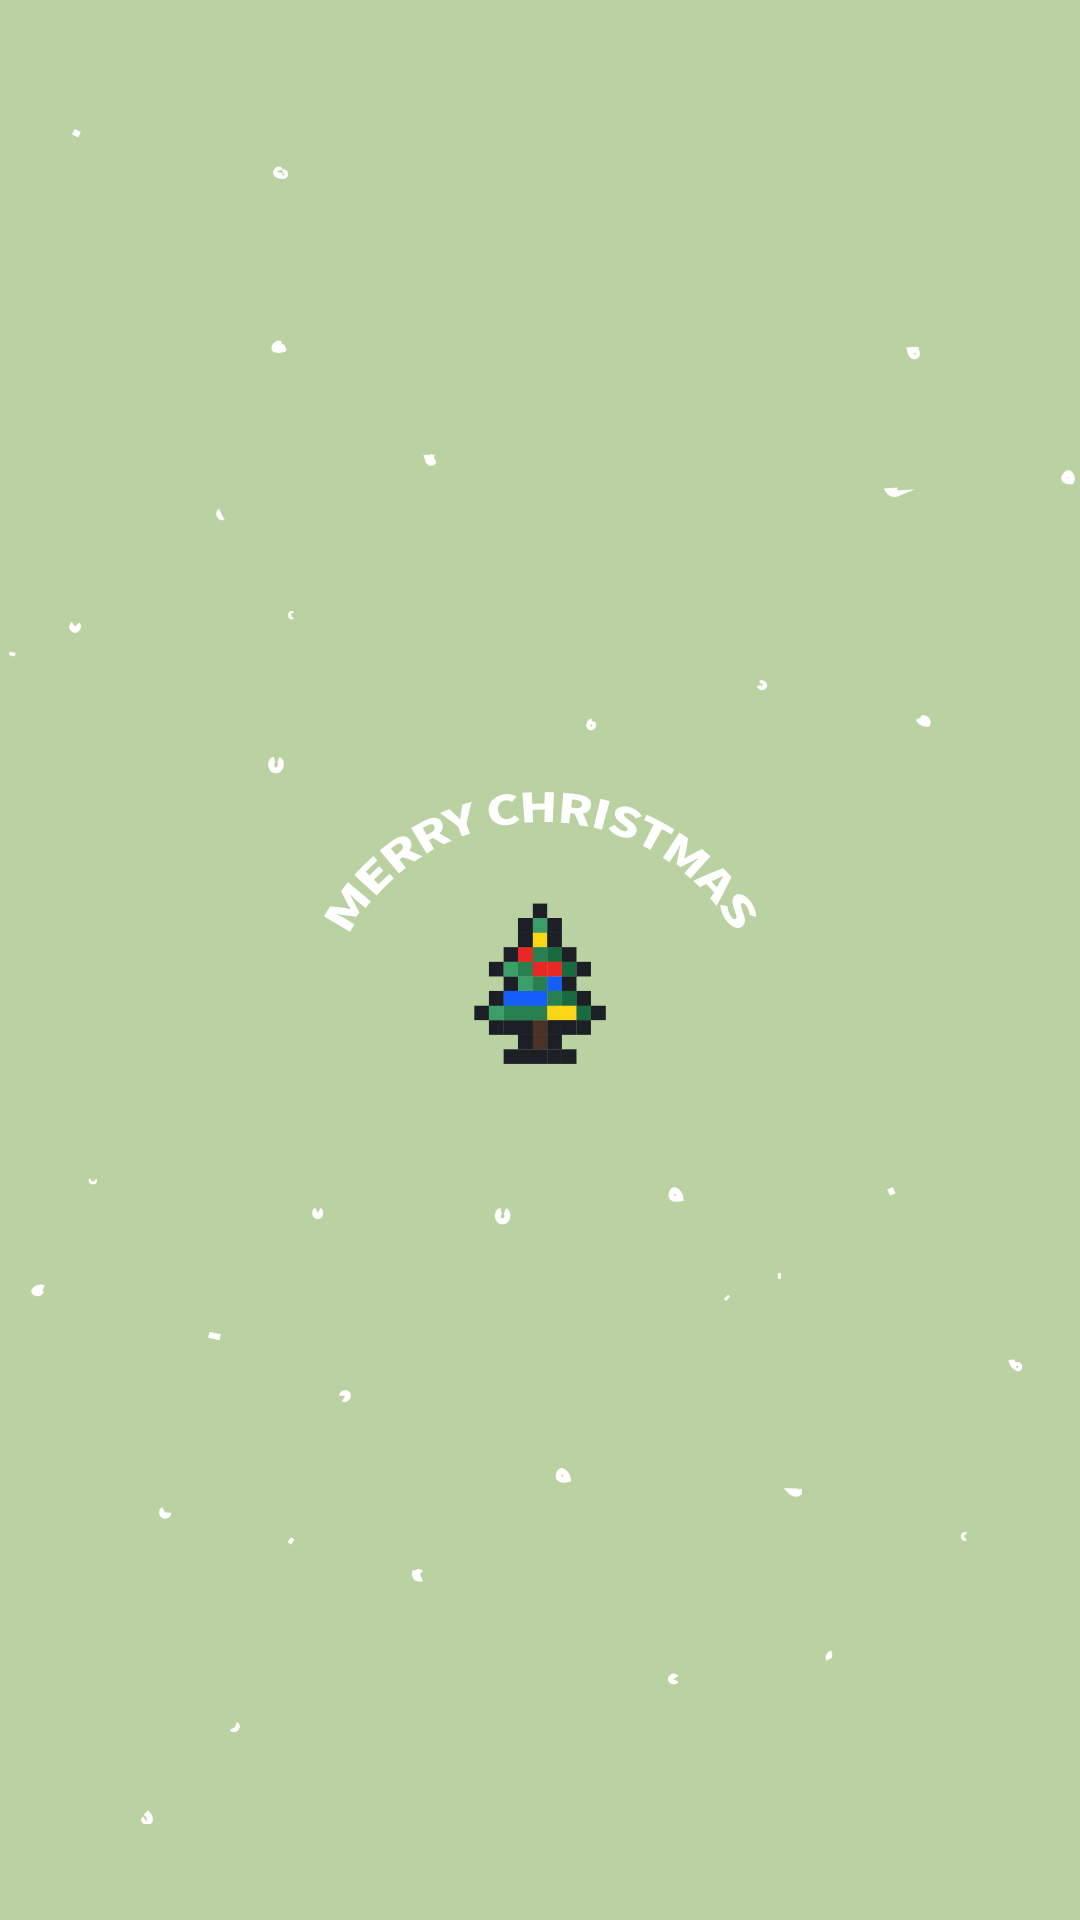 Pixel art Christmas tree on a green background - Cute Christmas